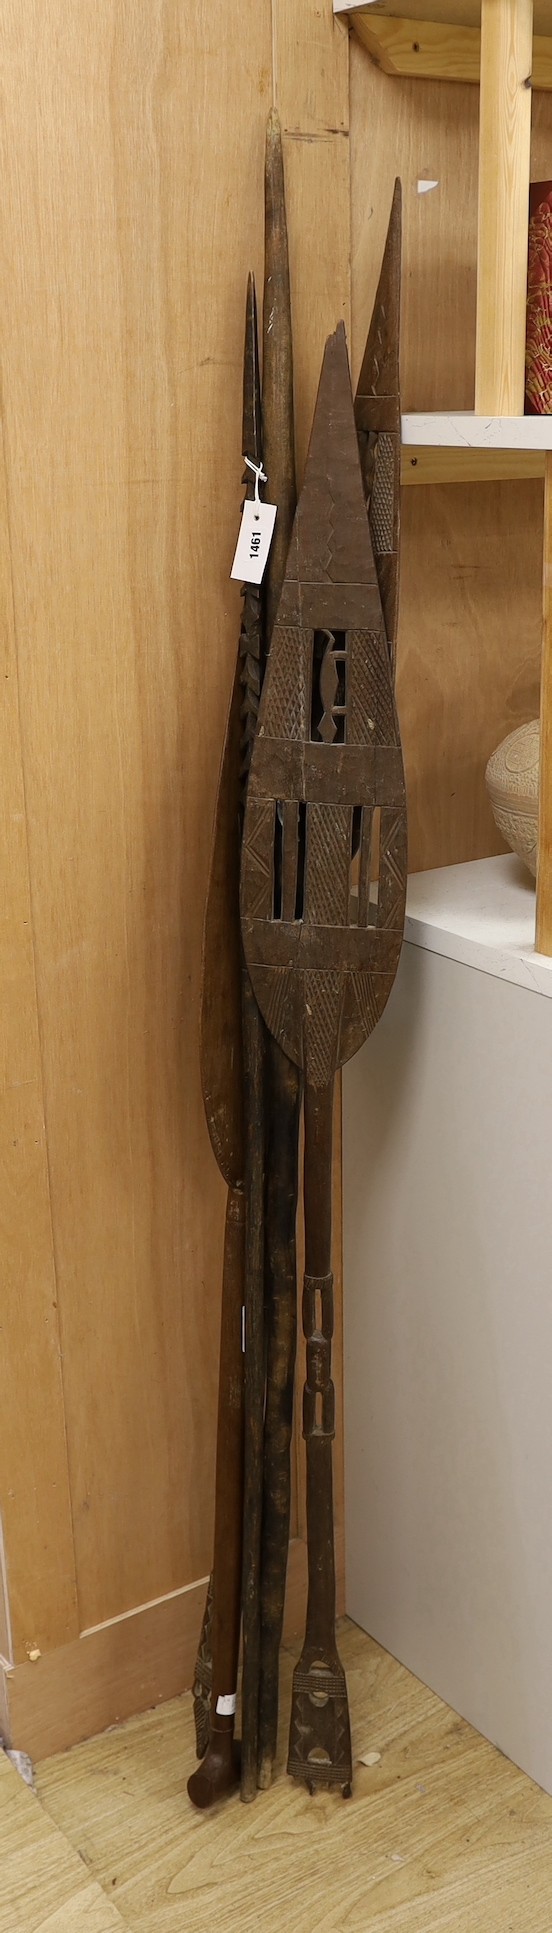 A Dayak spear paddle and four Papua New Guinea spears